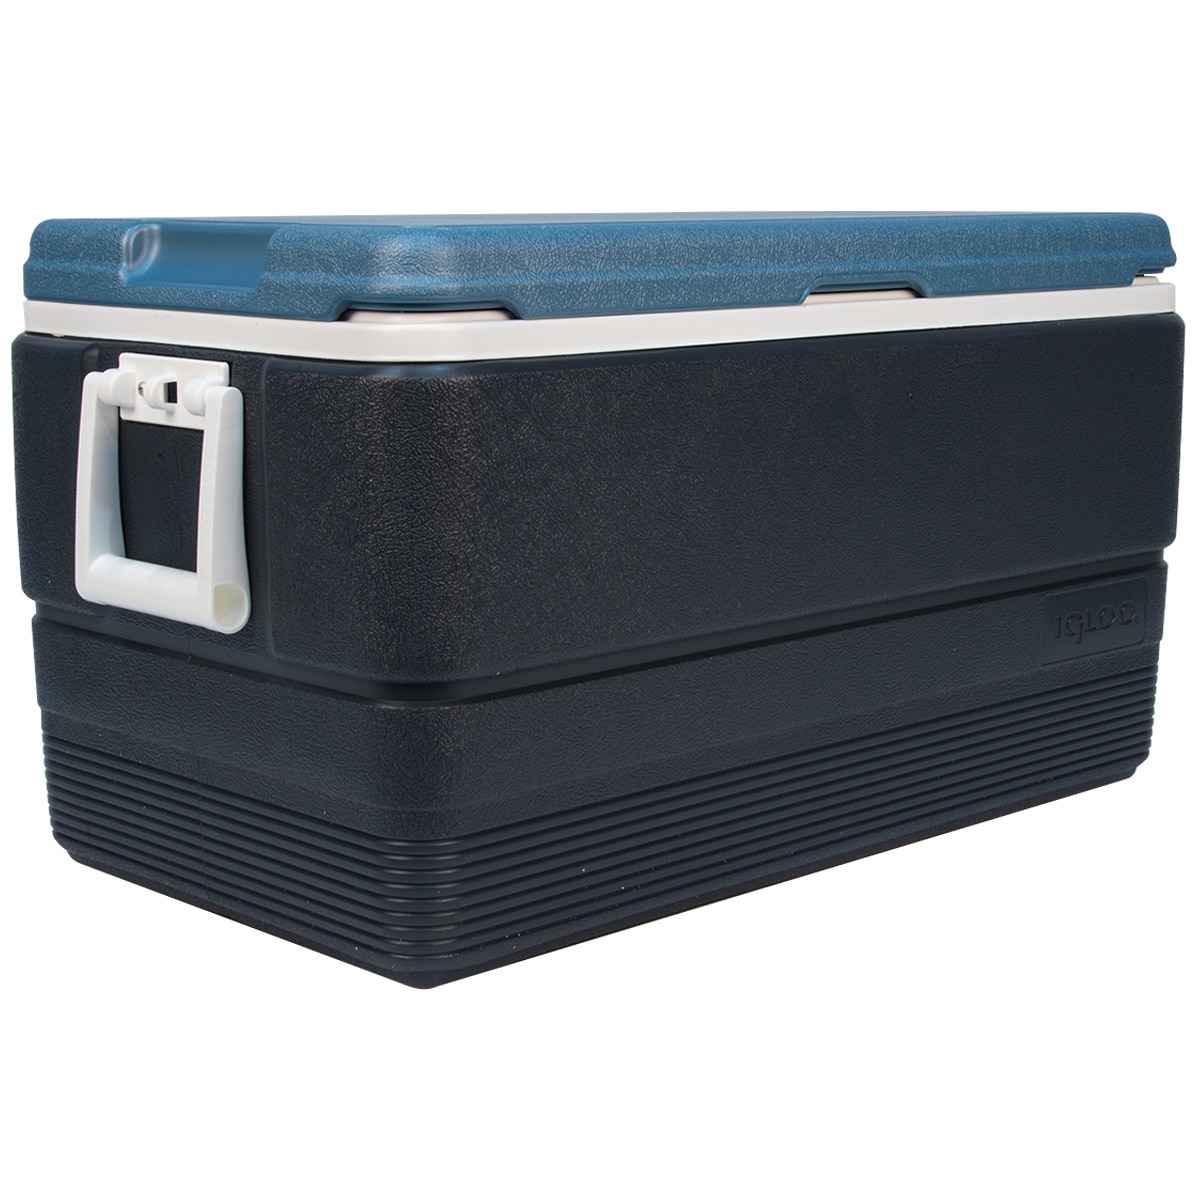 Igloo Maxcold 70 Litre Cooler